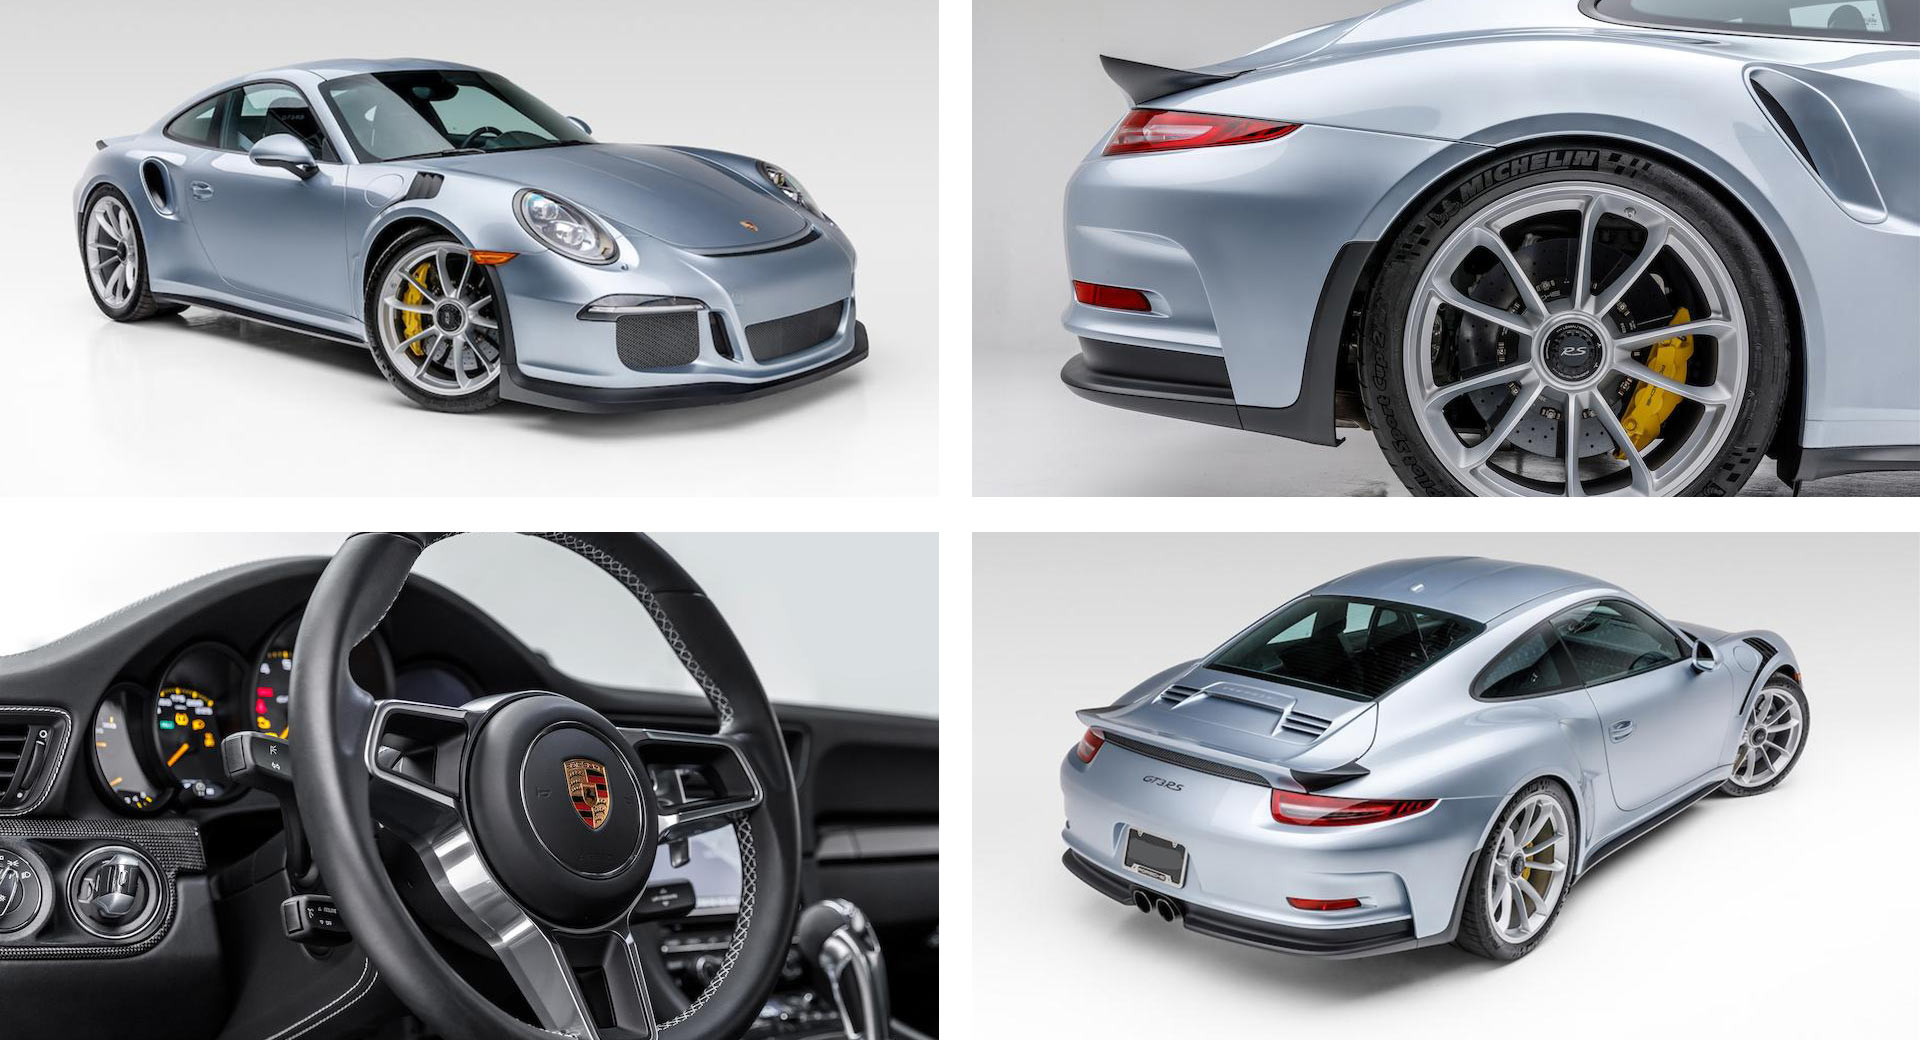 Jerry Seinfeld’s Porsche 911 GT3 RS 2016 has over $ 250,000 in options